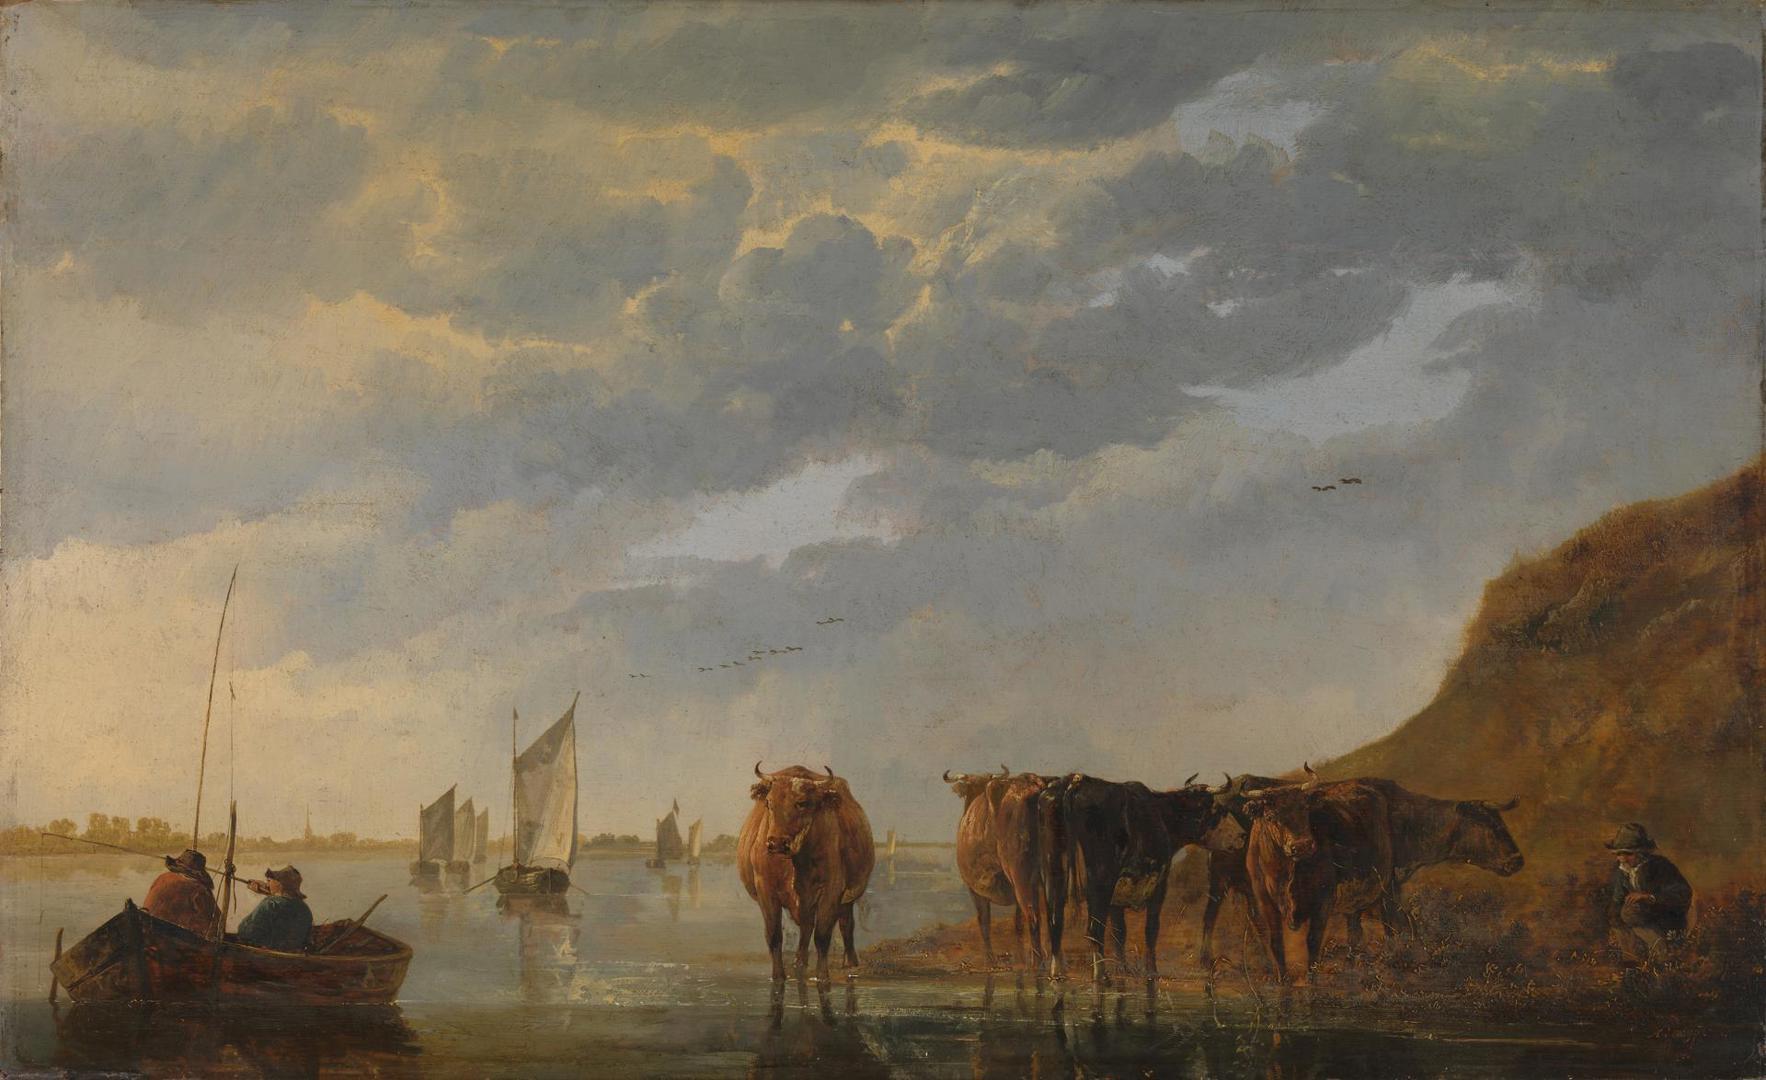 A Herdsman with Five Cows by a River by Aelbert Cuyp